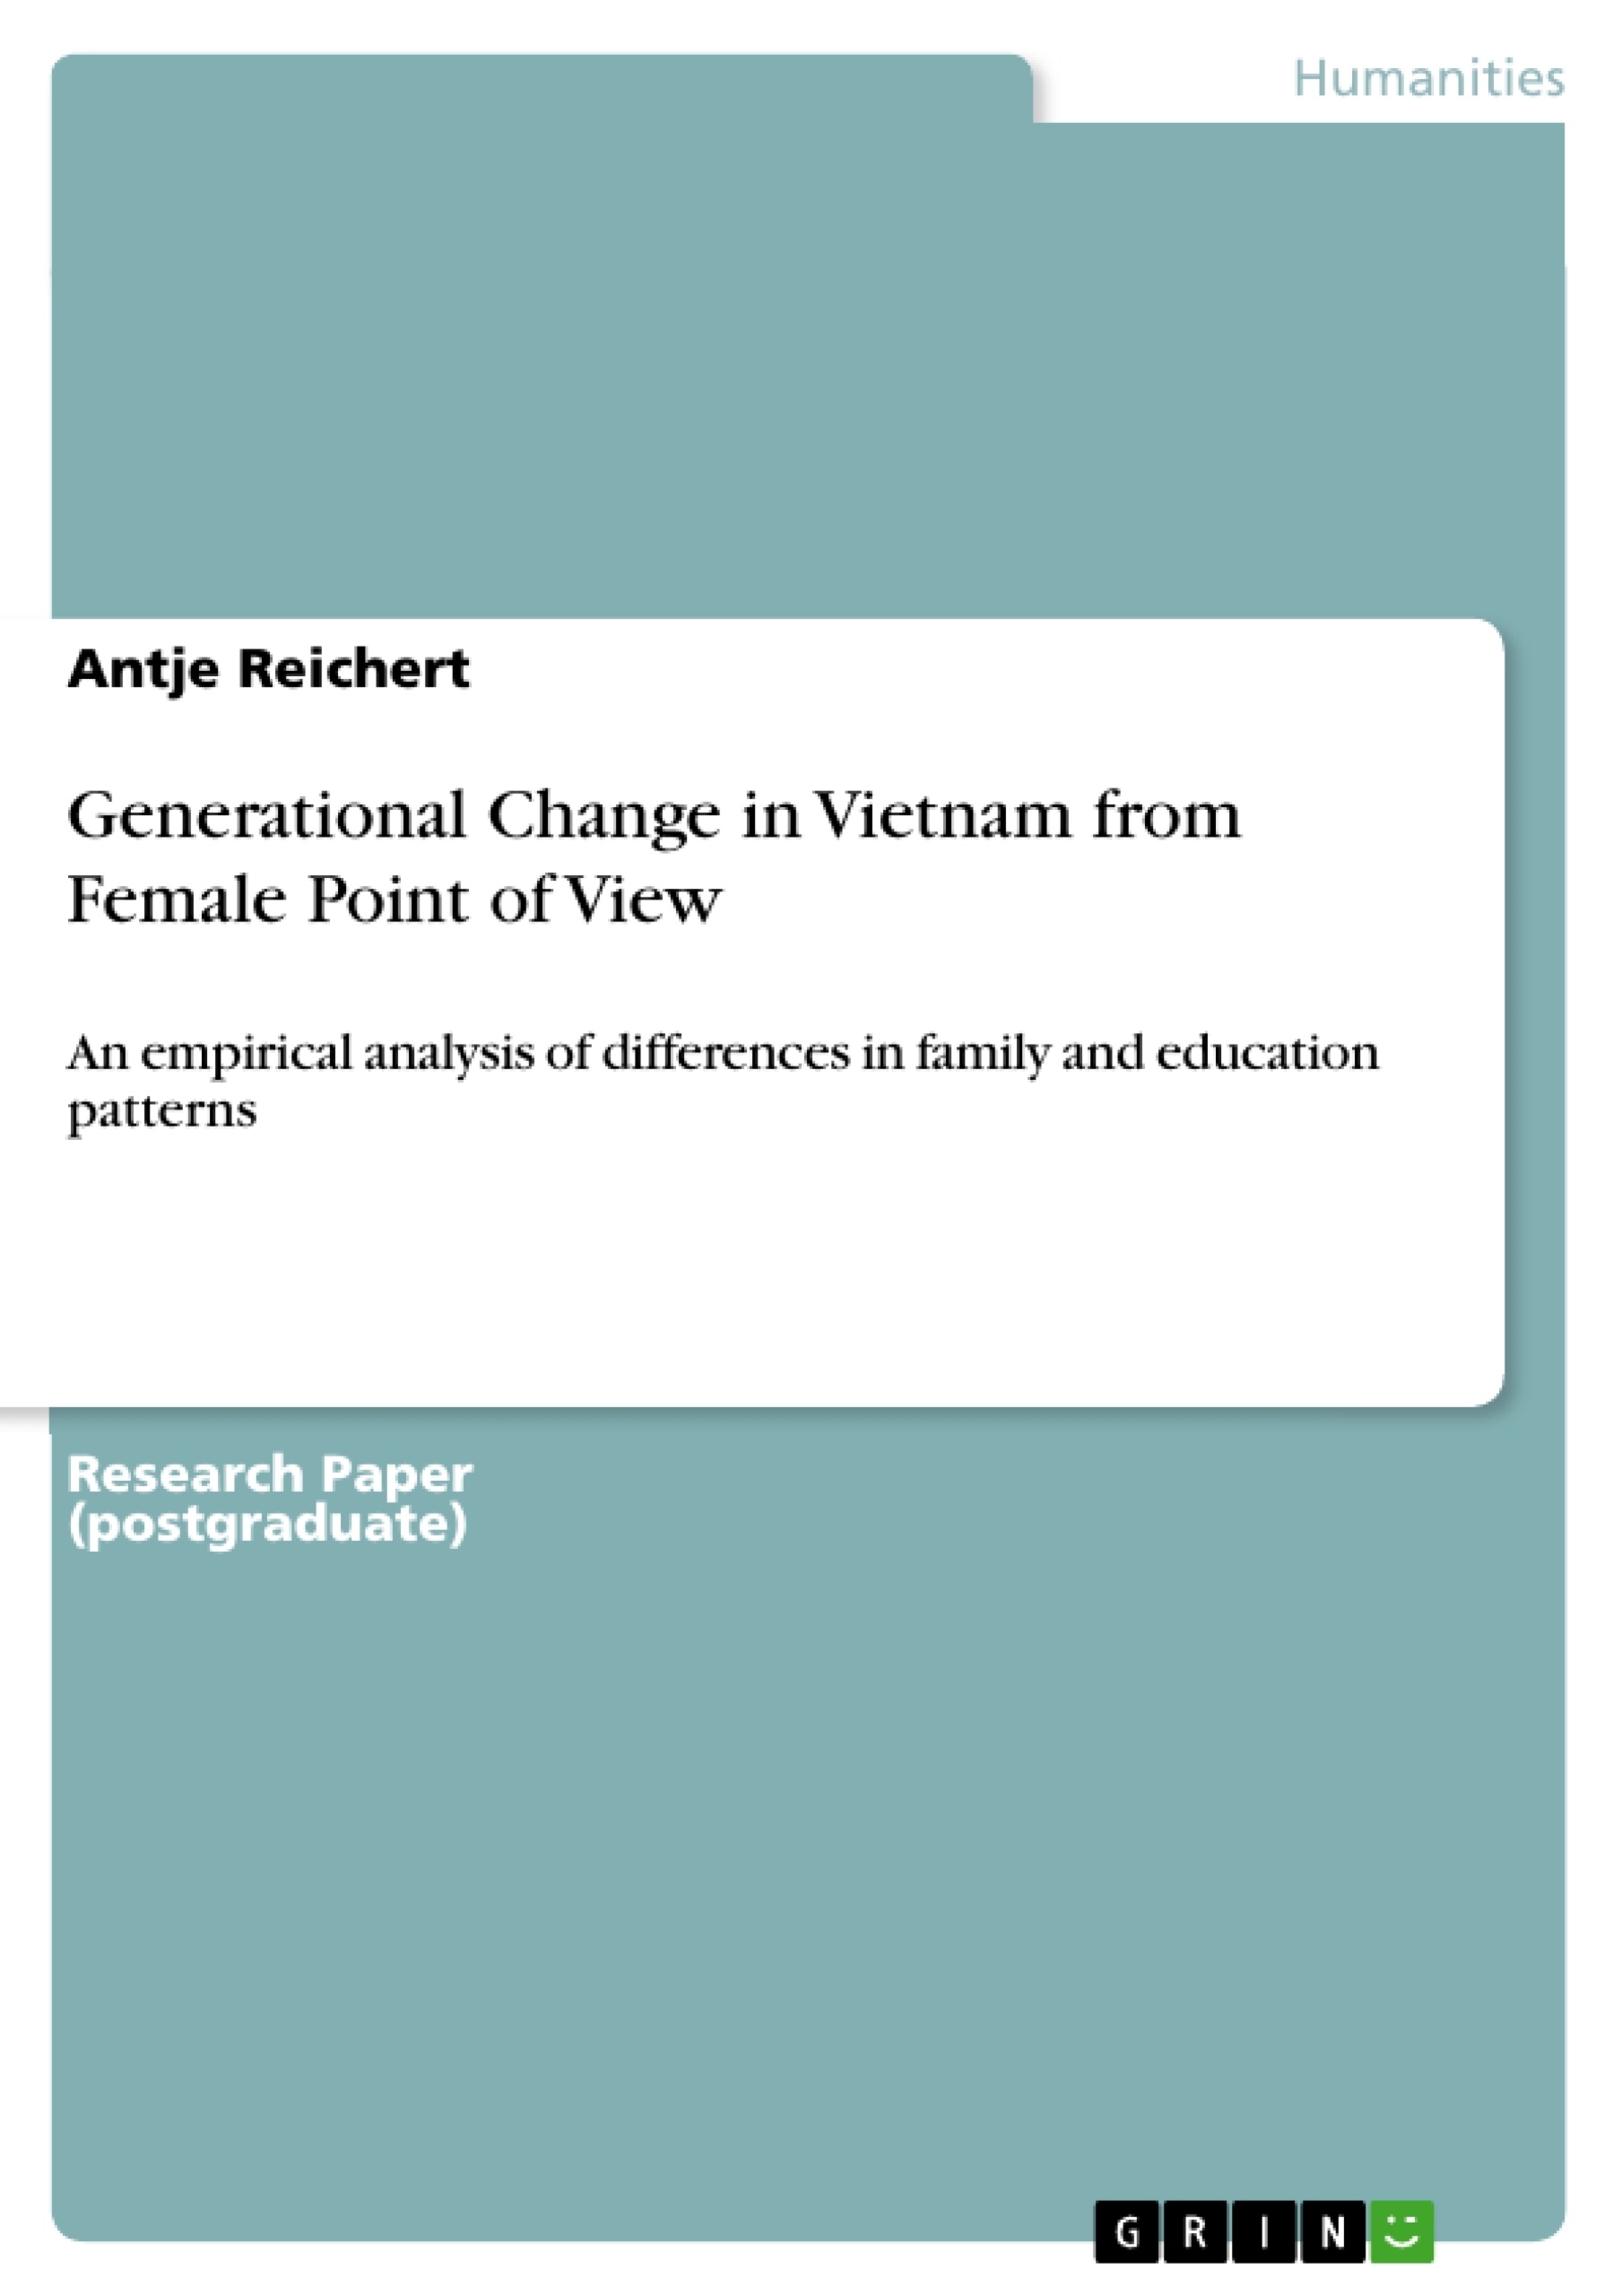 Título: Generational Change in Vietnam from Female Point of View